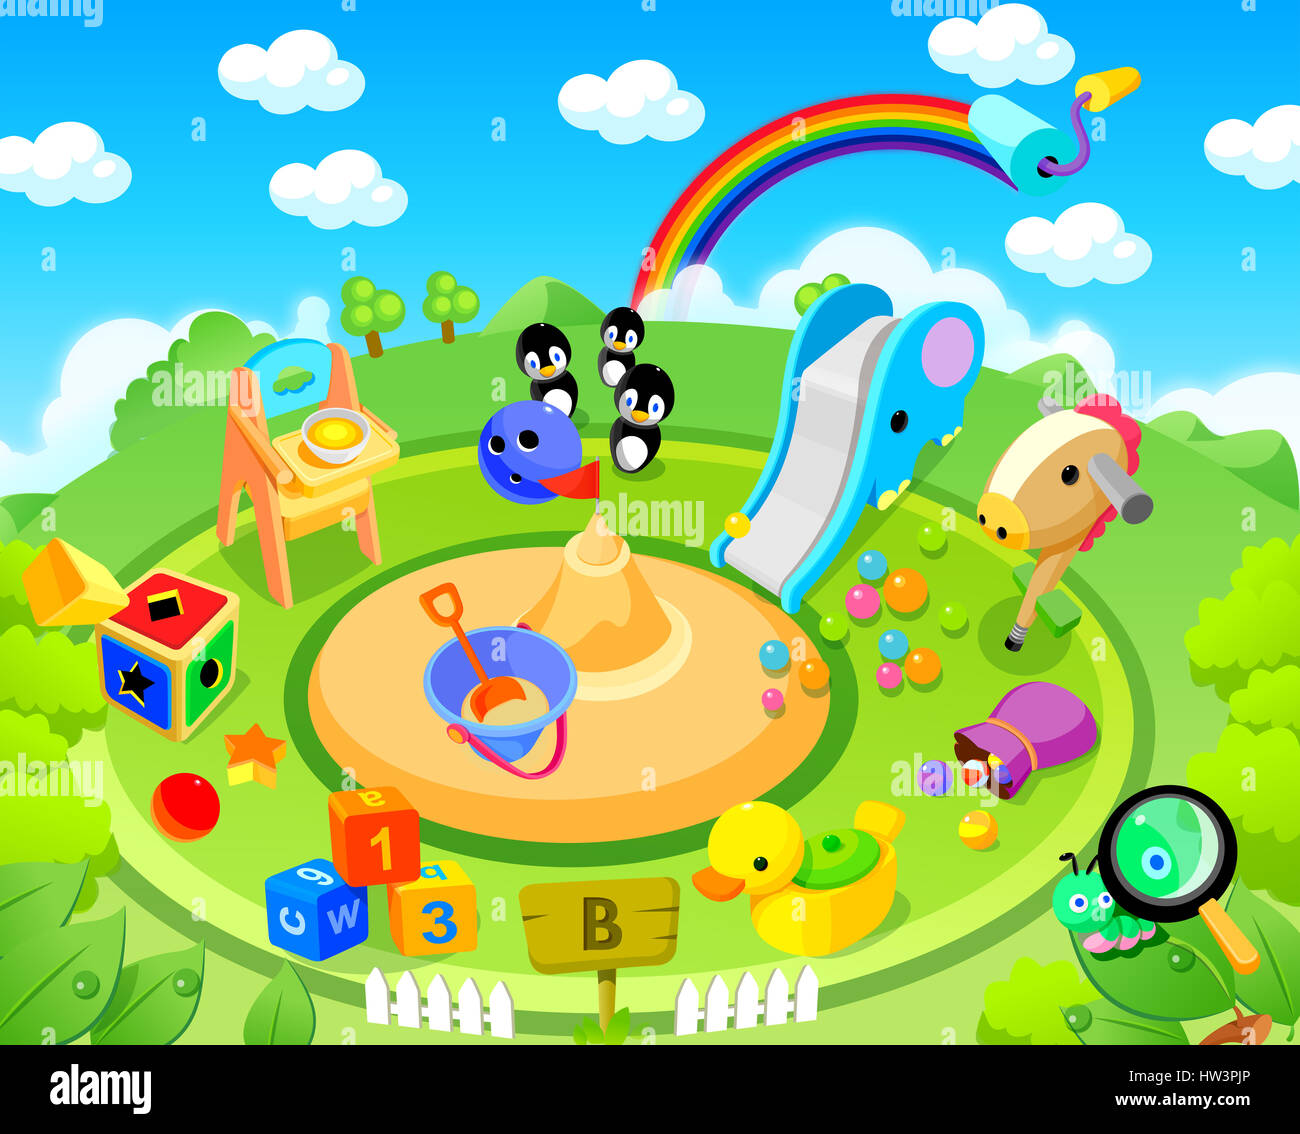 animal themes,animal,bag,ball,block,bowl,bowling ball,bowling,bowling pin,chair,childhood,clipart,cloud,color,colour,color image,computer graphics,day,digitally generated image,fence,food,food and drink,nutrition,nourishment,graphics,grass,green,high Stock Photo